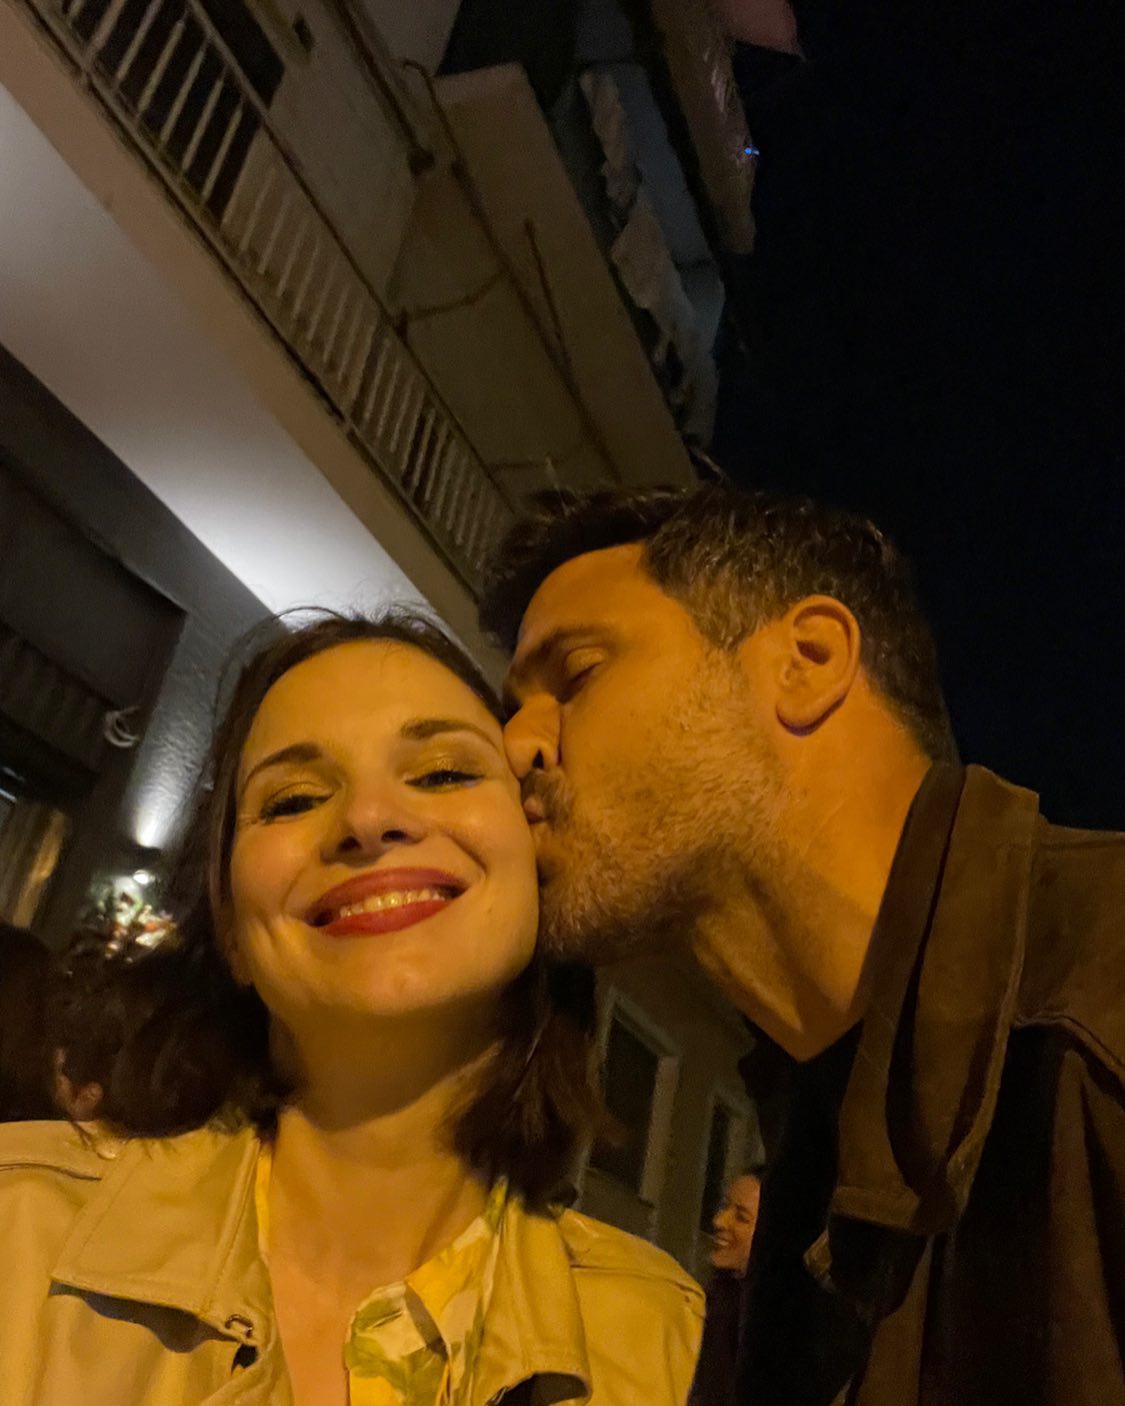 Photo by EvgeniaDimitropoulou in Bariero Athens with @michalisleventogiannis. May be a selfie of 2 people beard people kissing and night